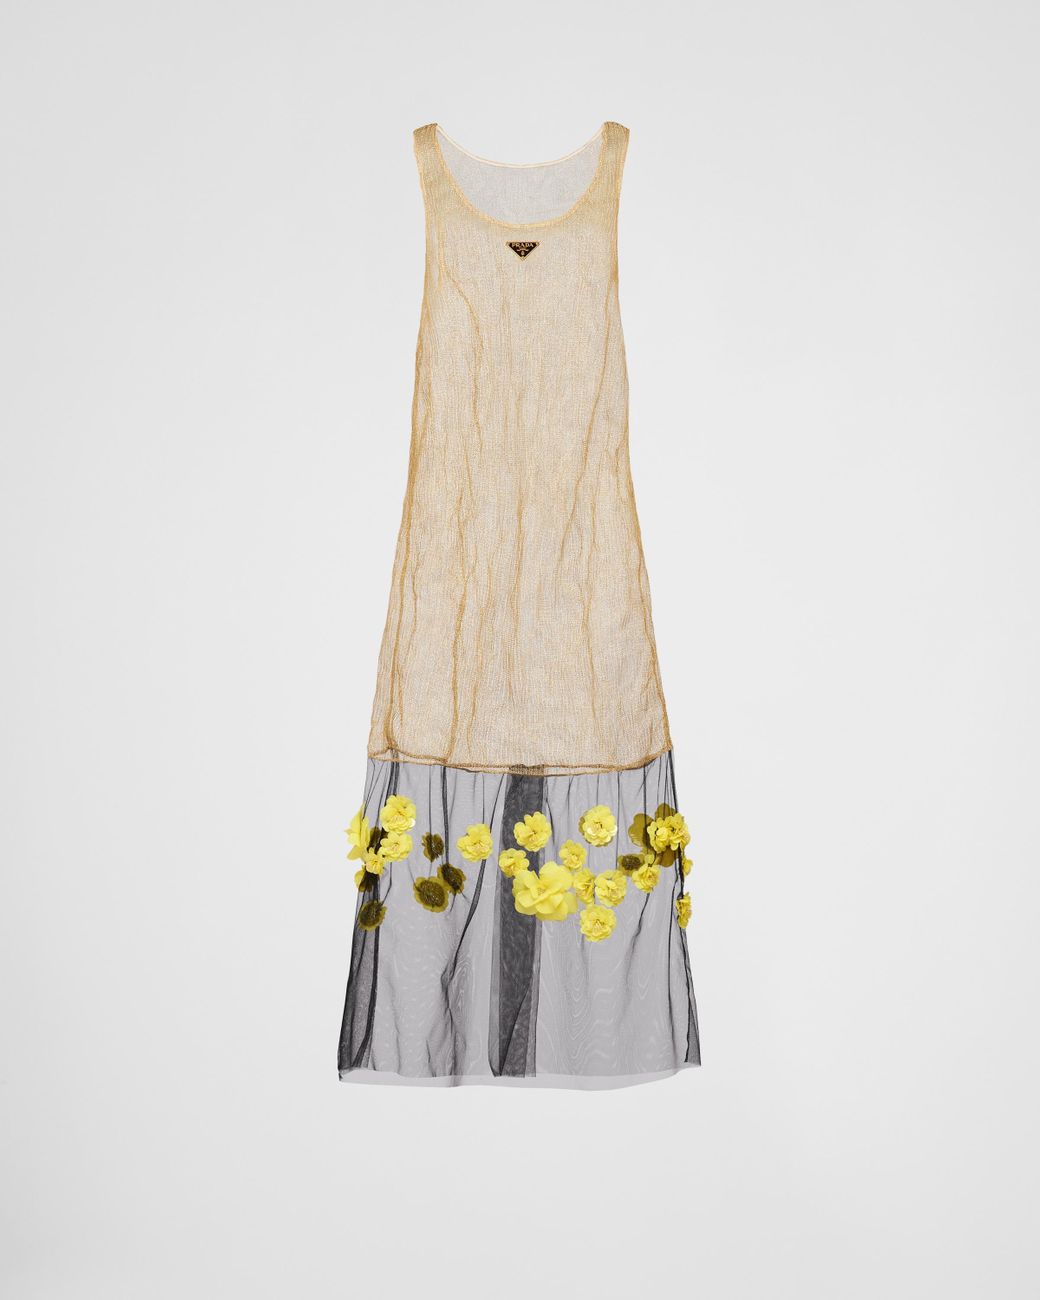 Prada Embroidered Mesh Dress in White | Lyst